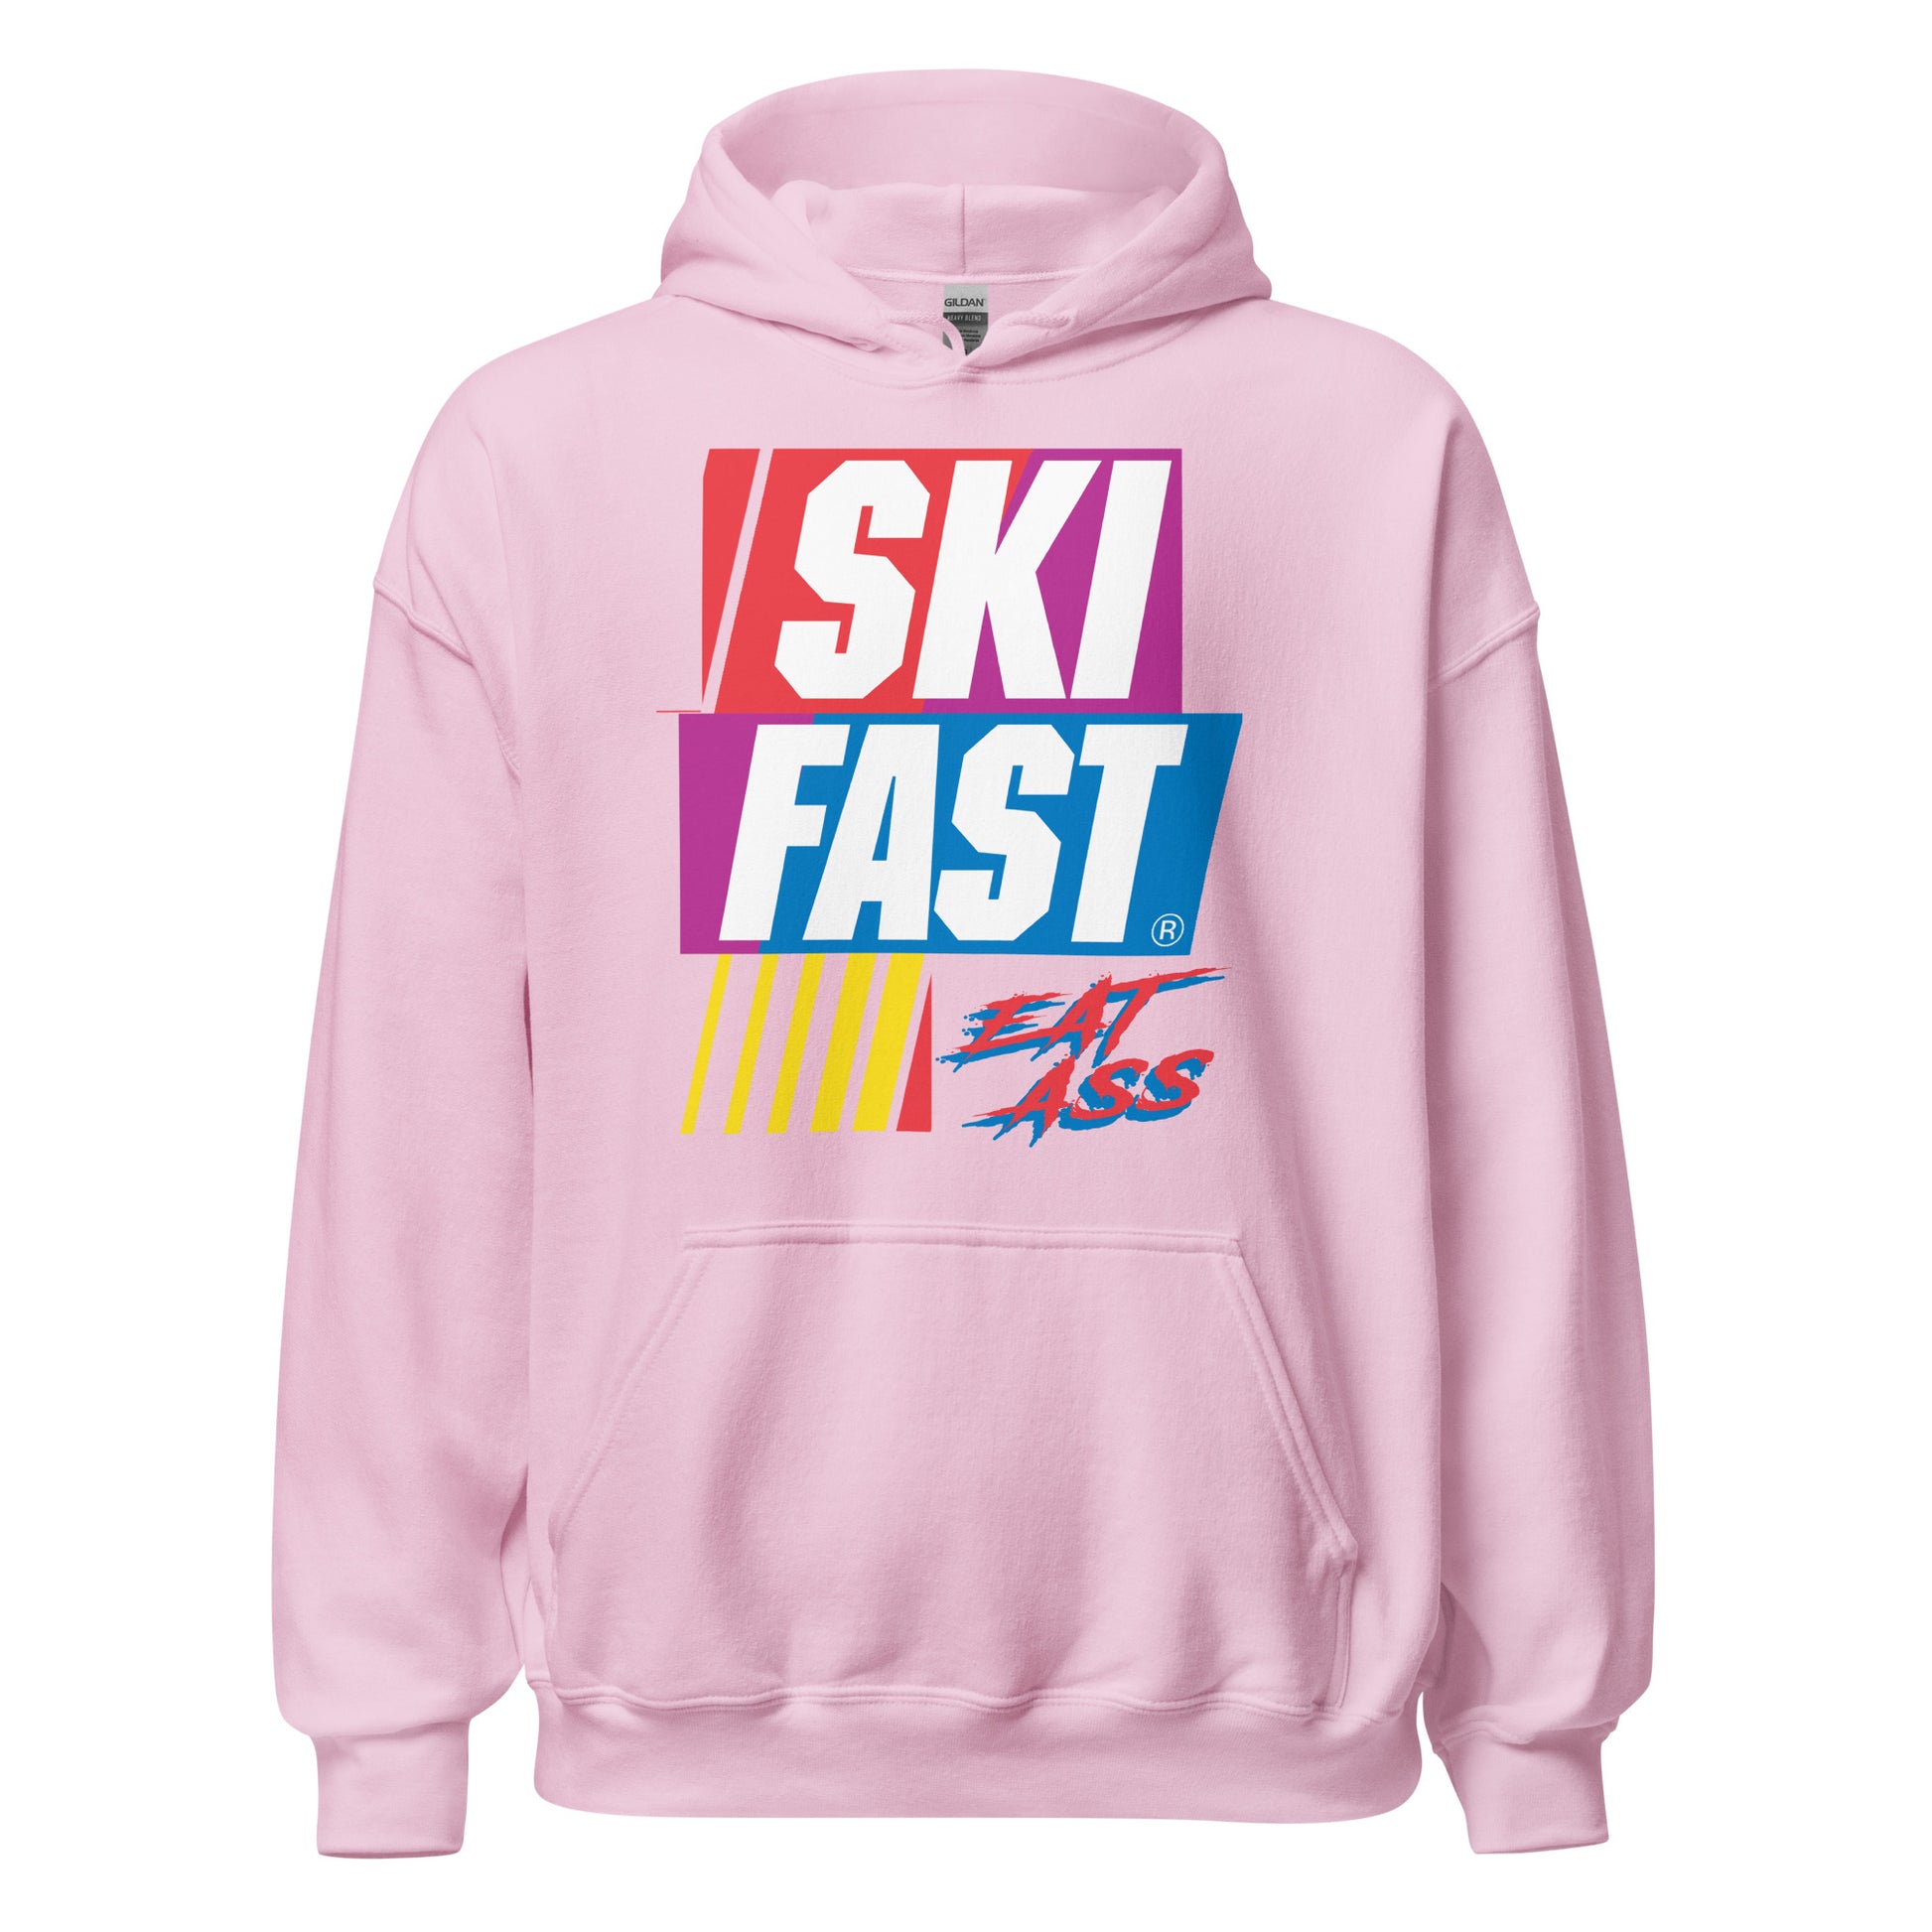 Ski fast eat ass printed hoodie by Whistler Shirts